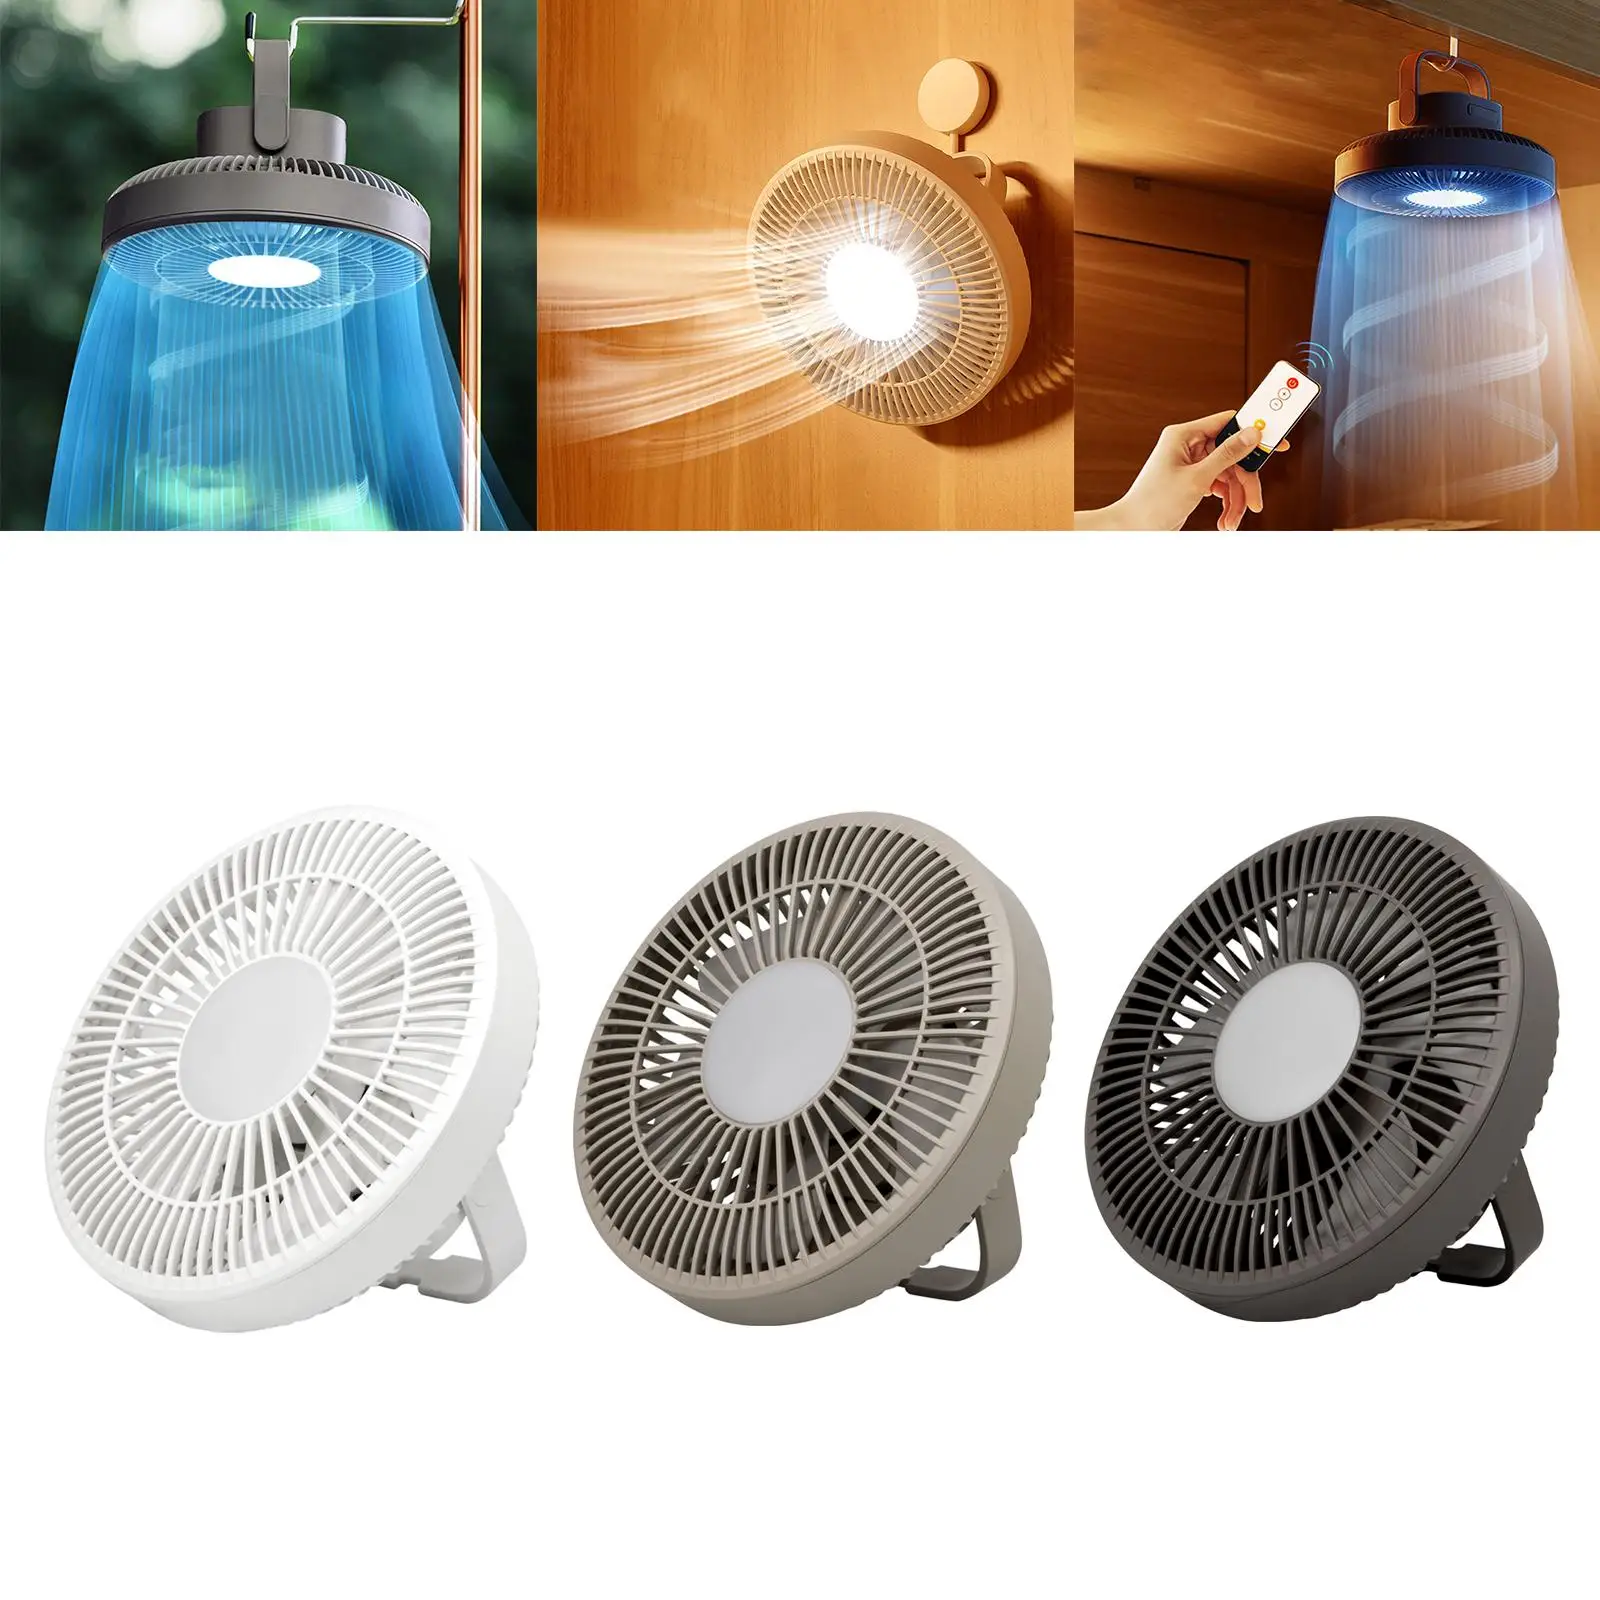 Portable Ceiling Small Cooling Camping Fan with Light for Home Office Travel